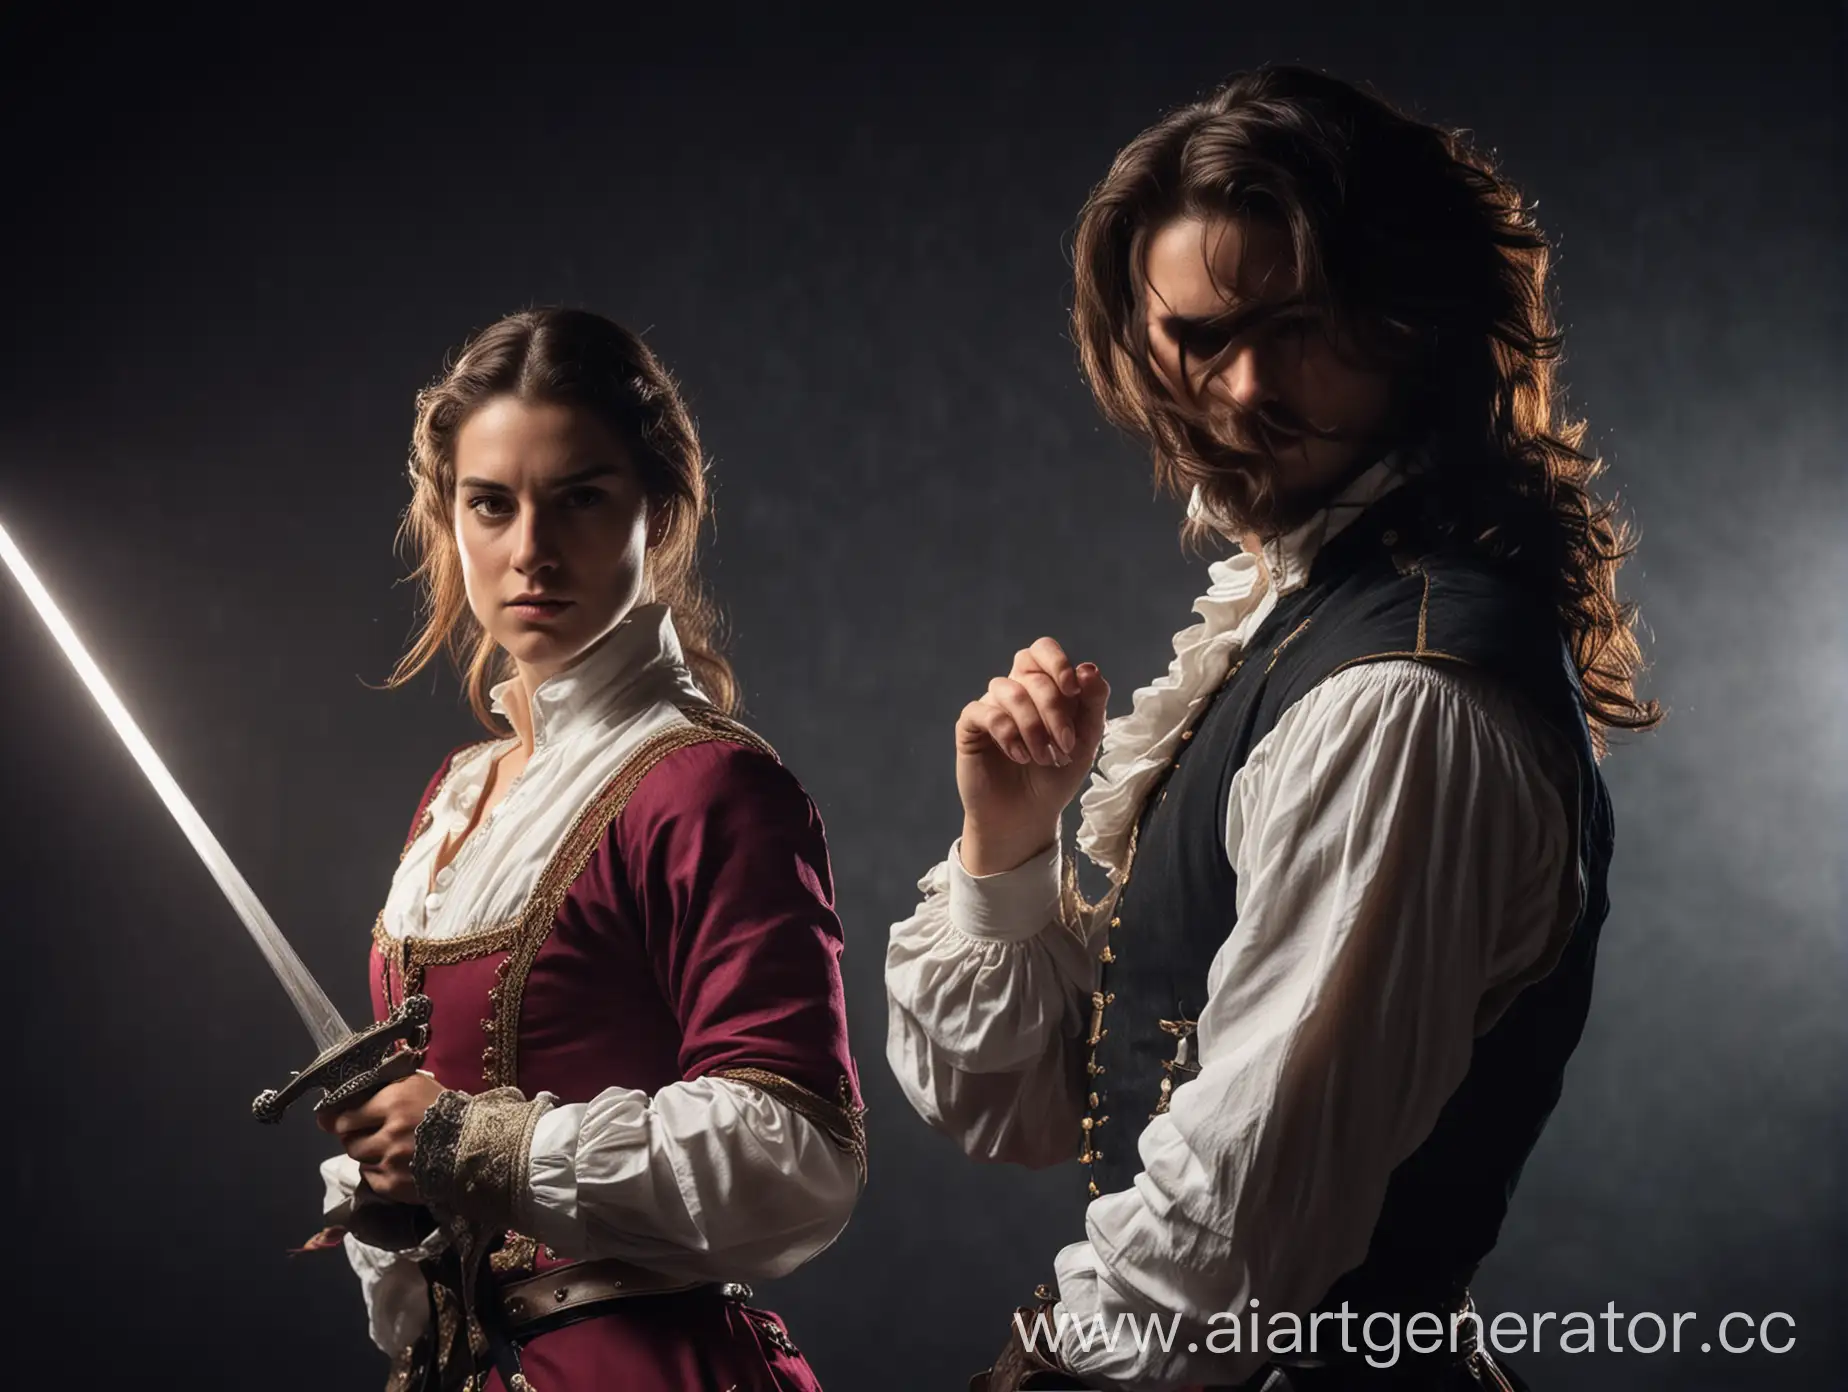 Dramatic-Duel-Musketeer-dArtagnan-Confronts-Seductive-Milady-in-Colored-Lighting